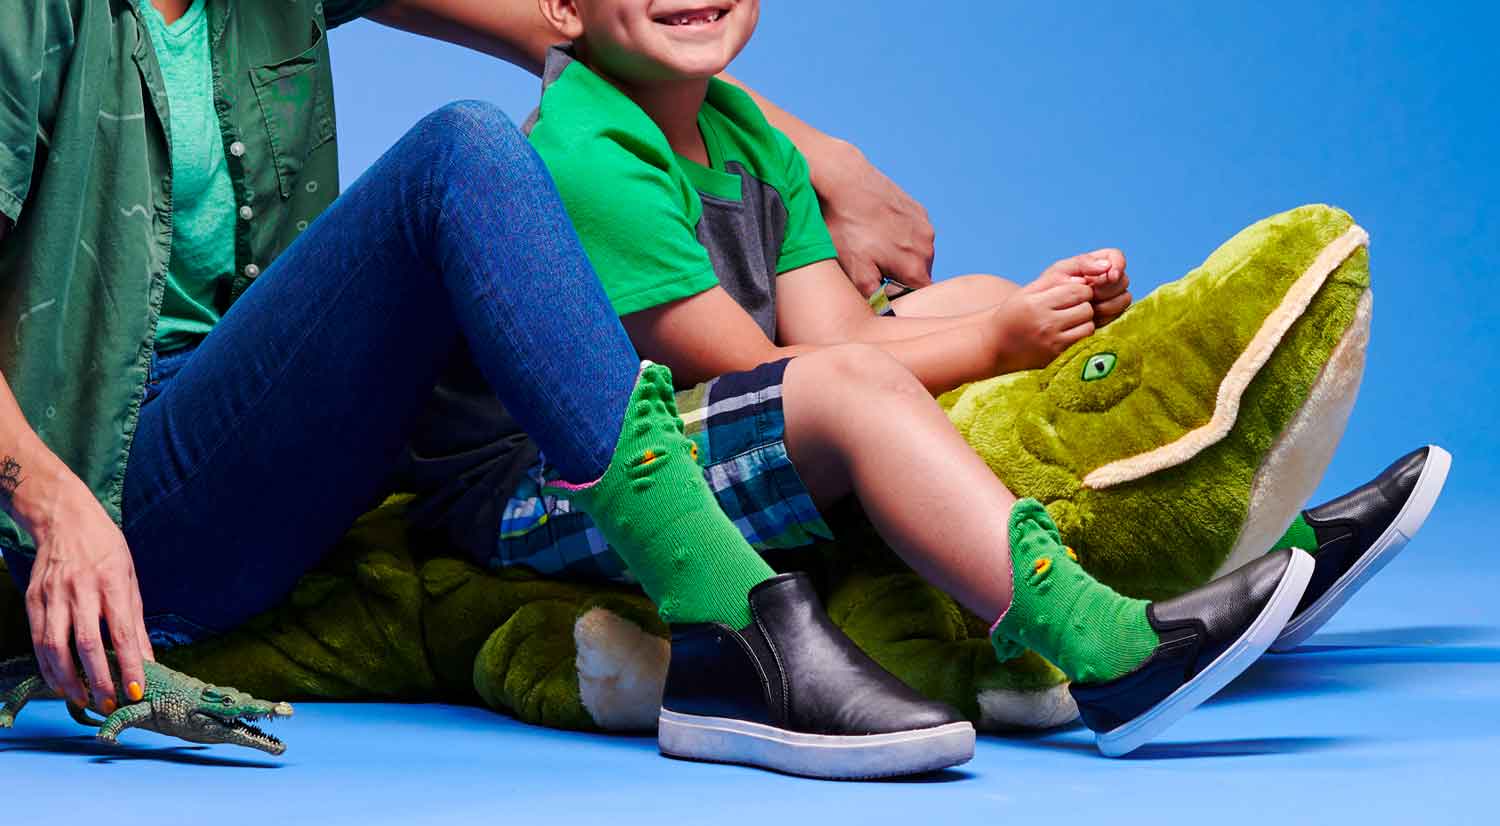 A woman and boy sitting on a giant plush stuffed alligator while wearing green 3D Alligator socks on a blue background.